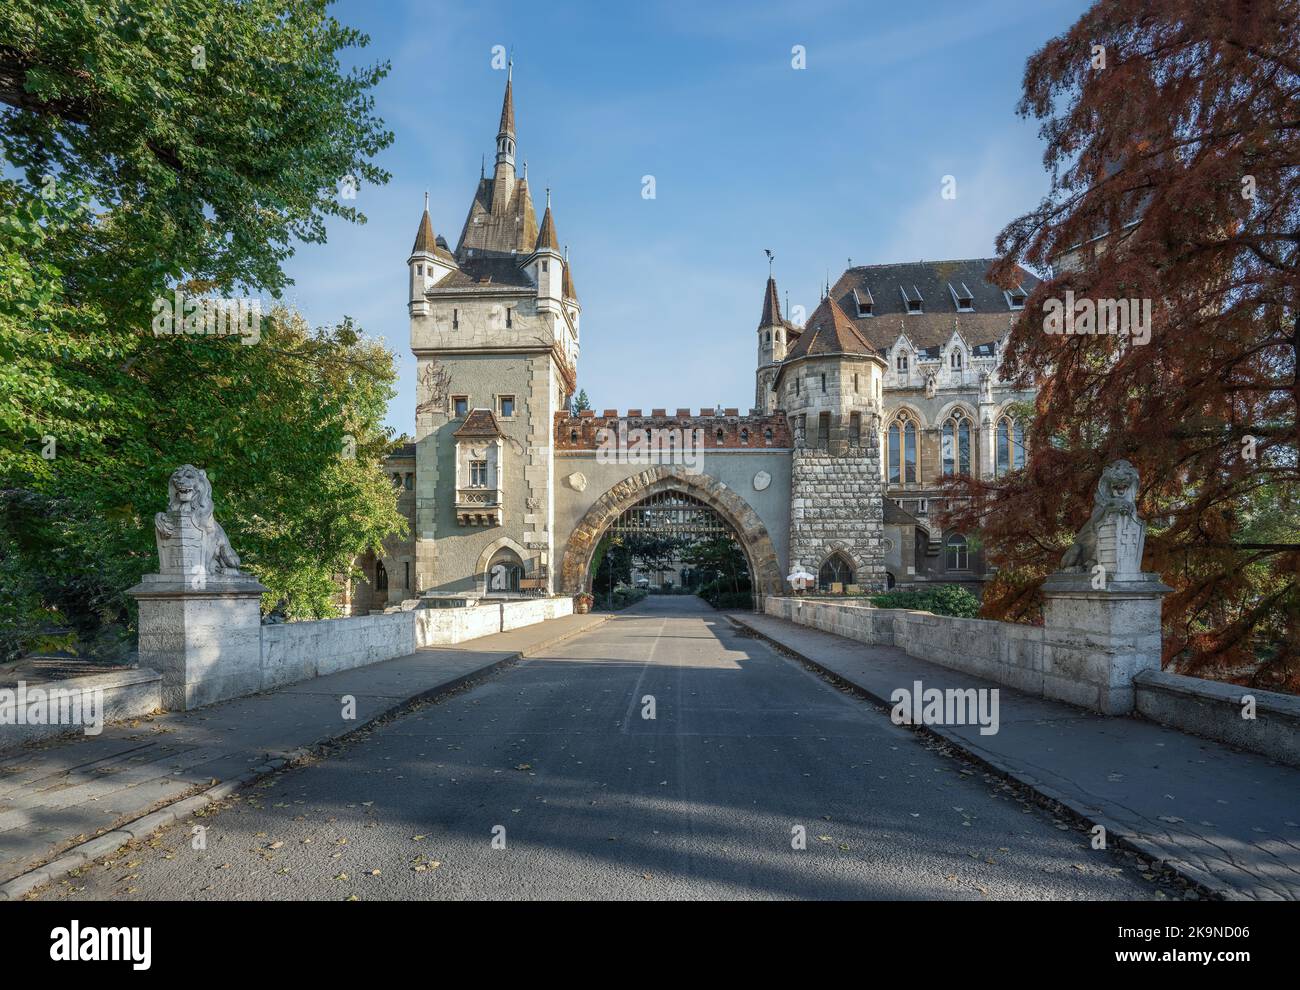 Gate and Tower at entrance of Vajdahunyad Castle - Budapest, Hungary Stock Photo